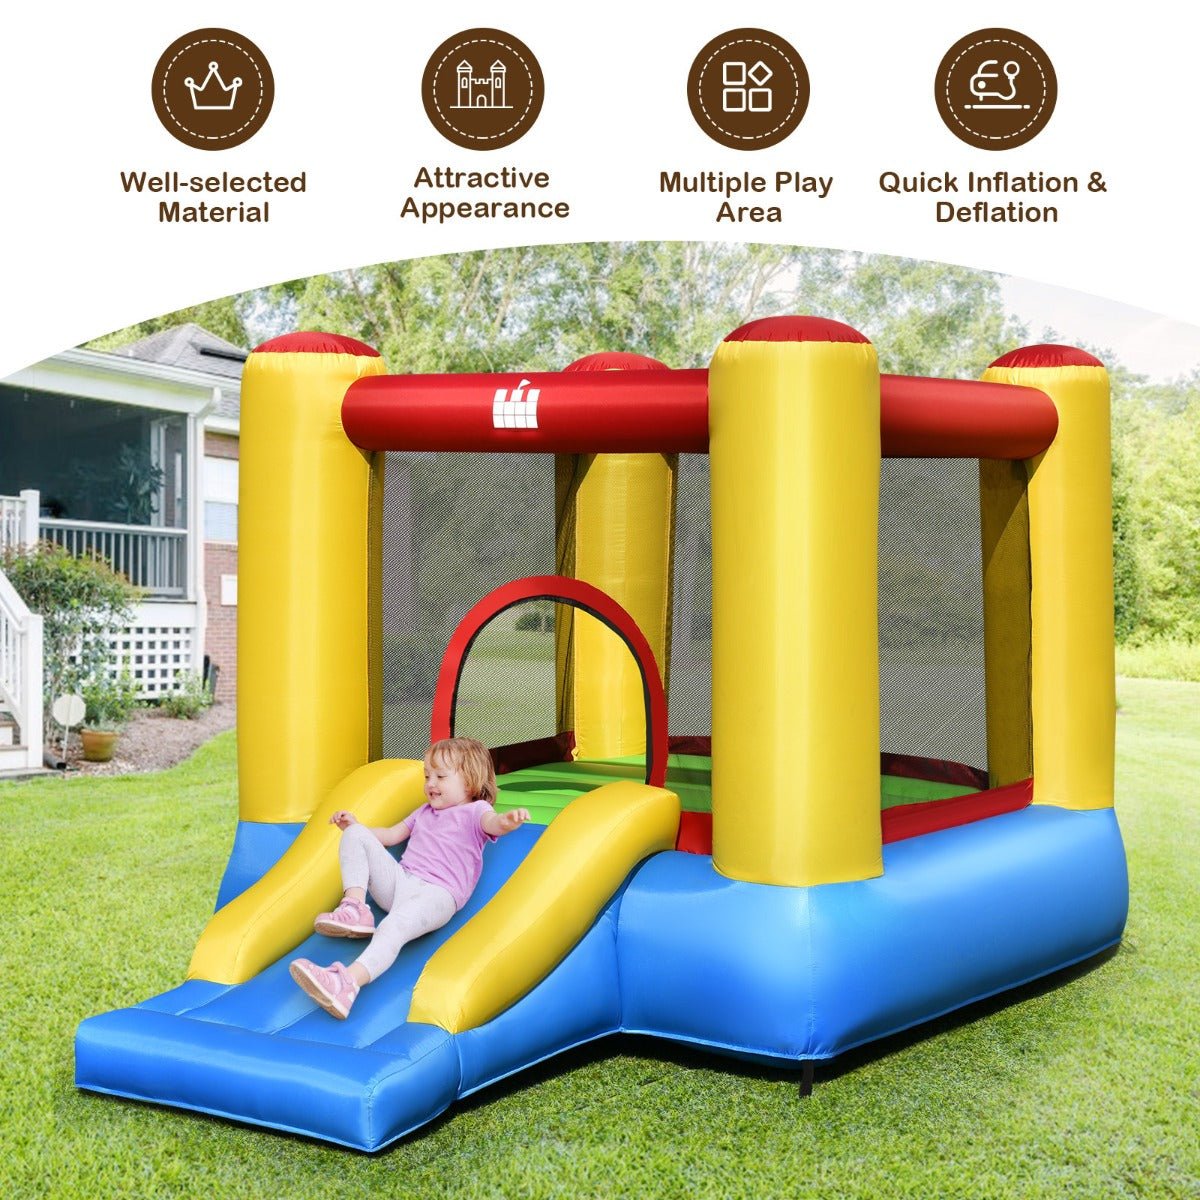 Joyful Jumping: Inflatable Bounce House with Slide for Young Explorers